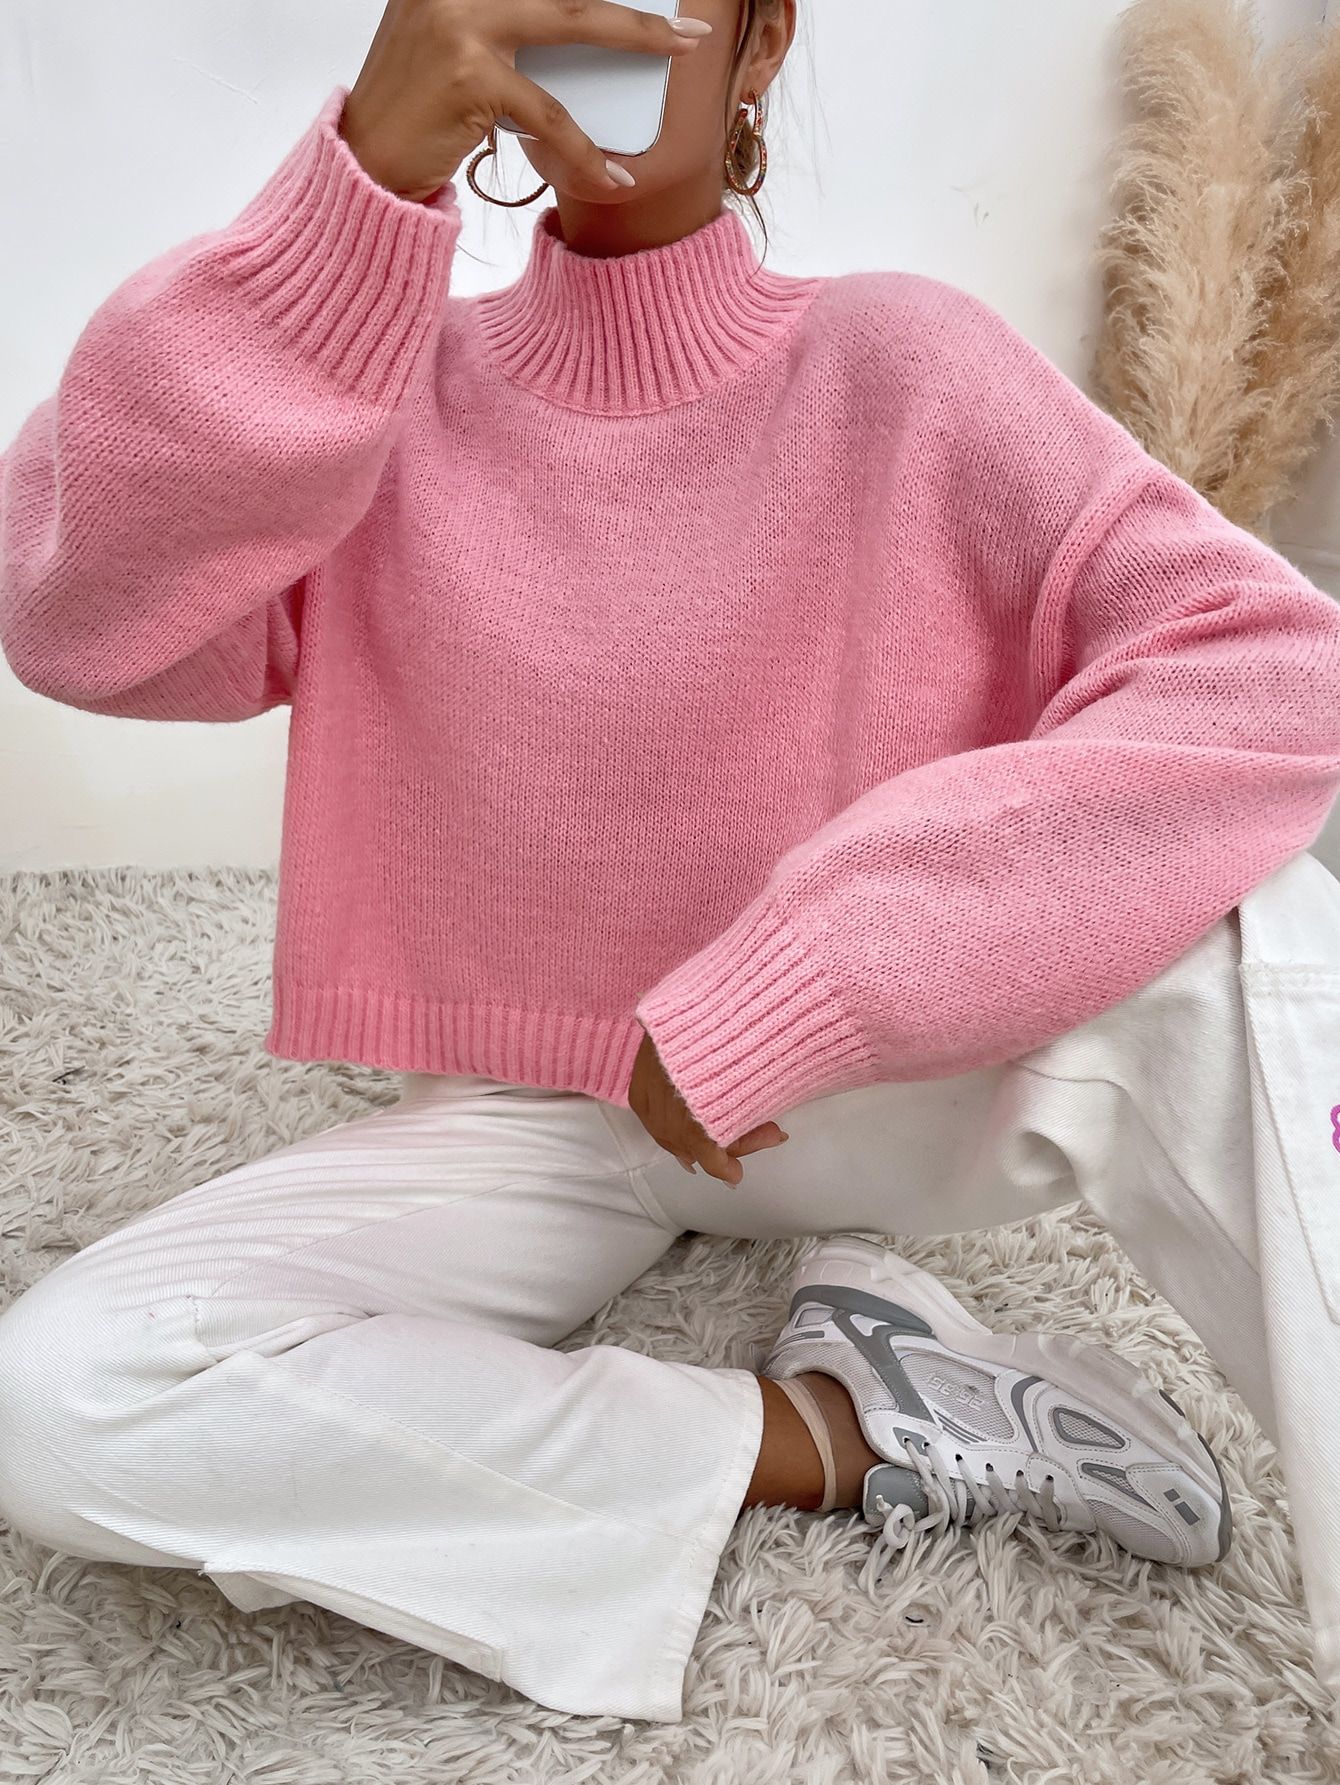 How to Wear Pink Pullover: 13 Lovely & Chic Outfit Ideas for Women